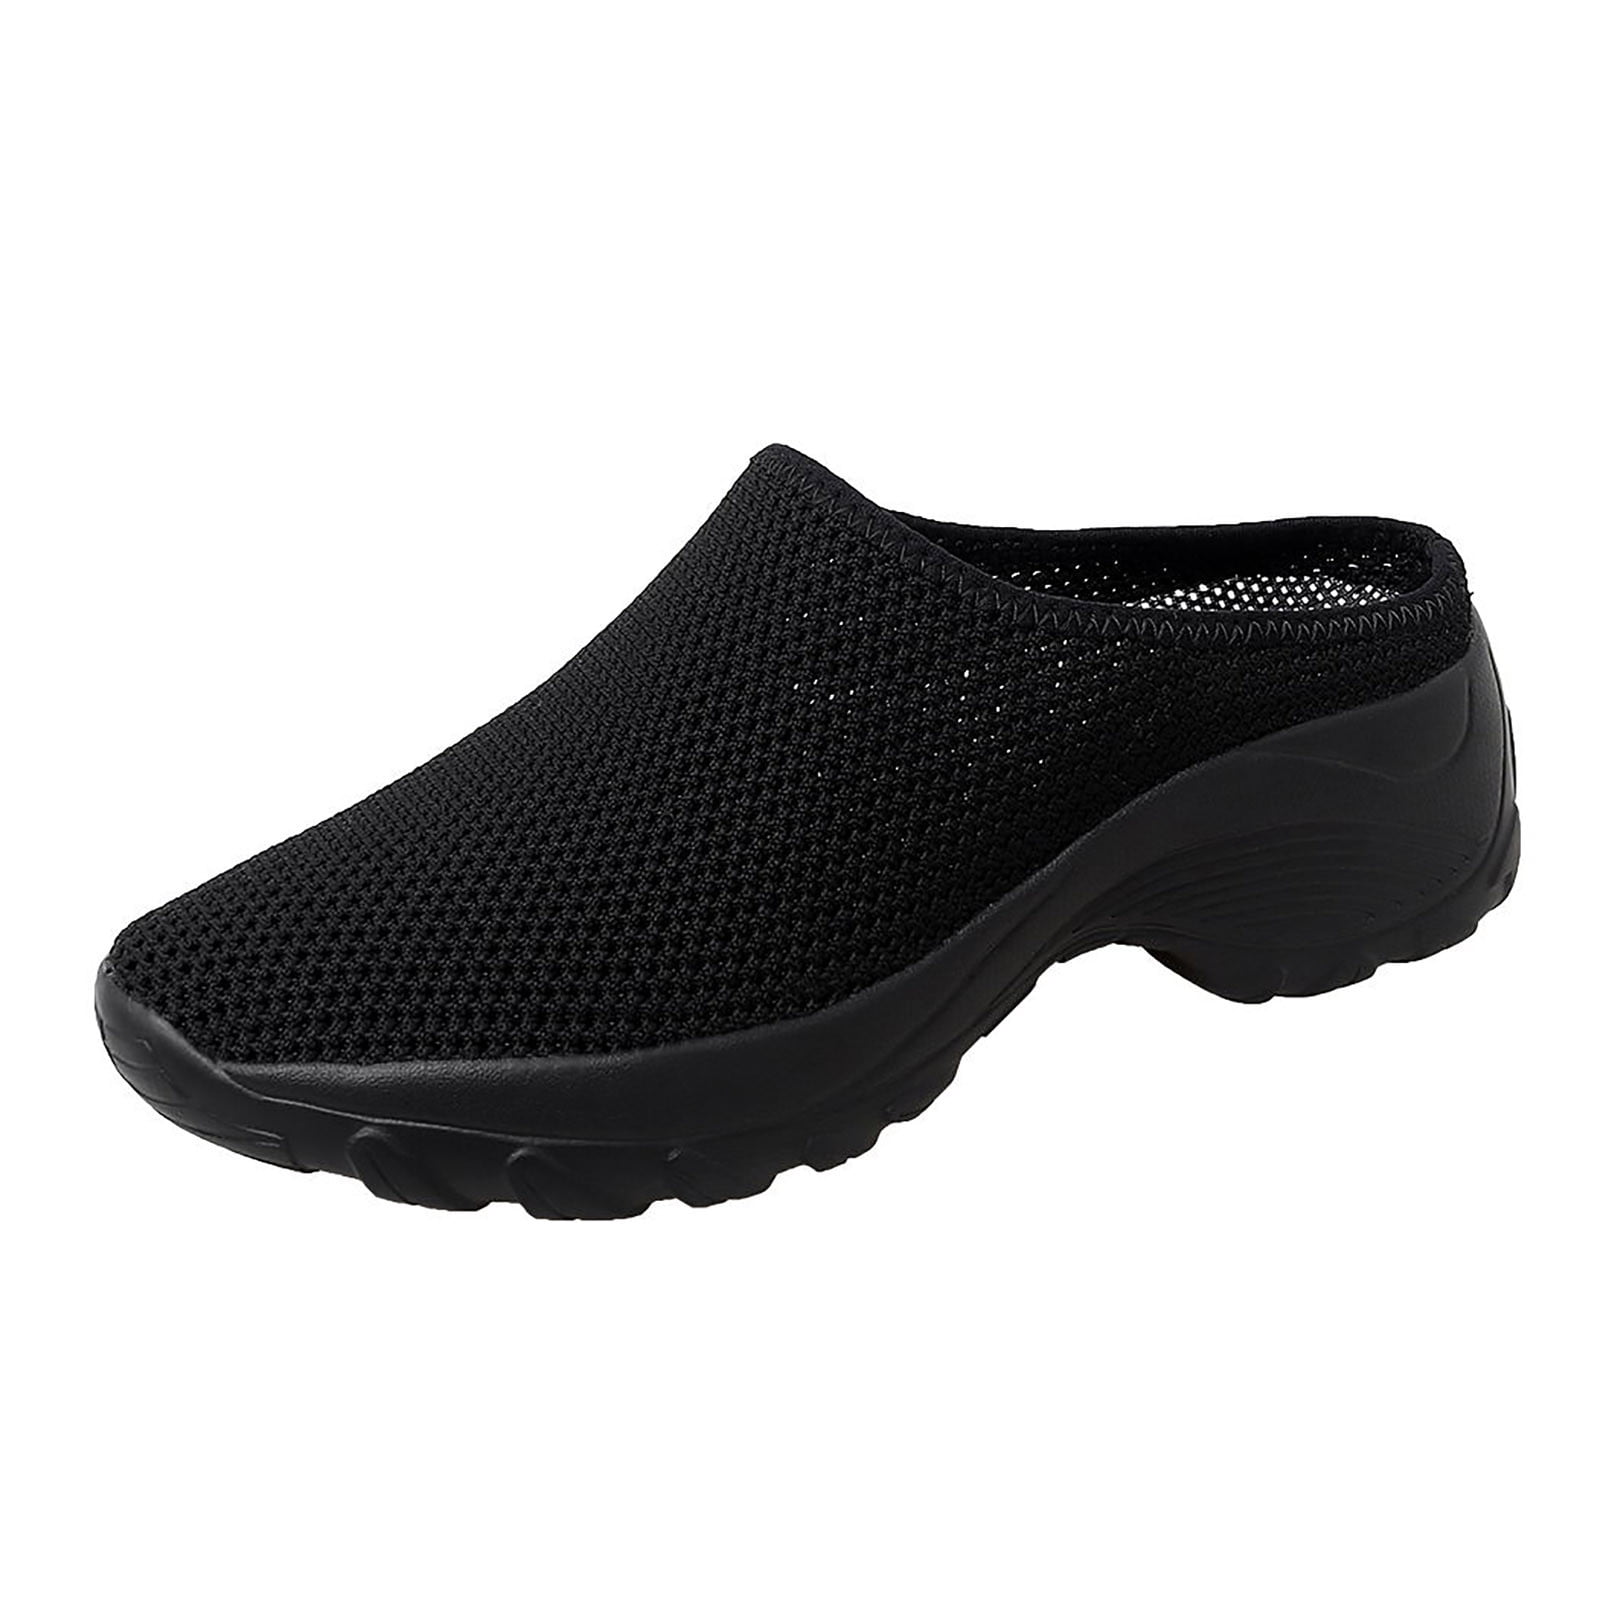 Share 248+ comfortable slippers for walking latest